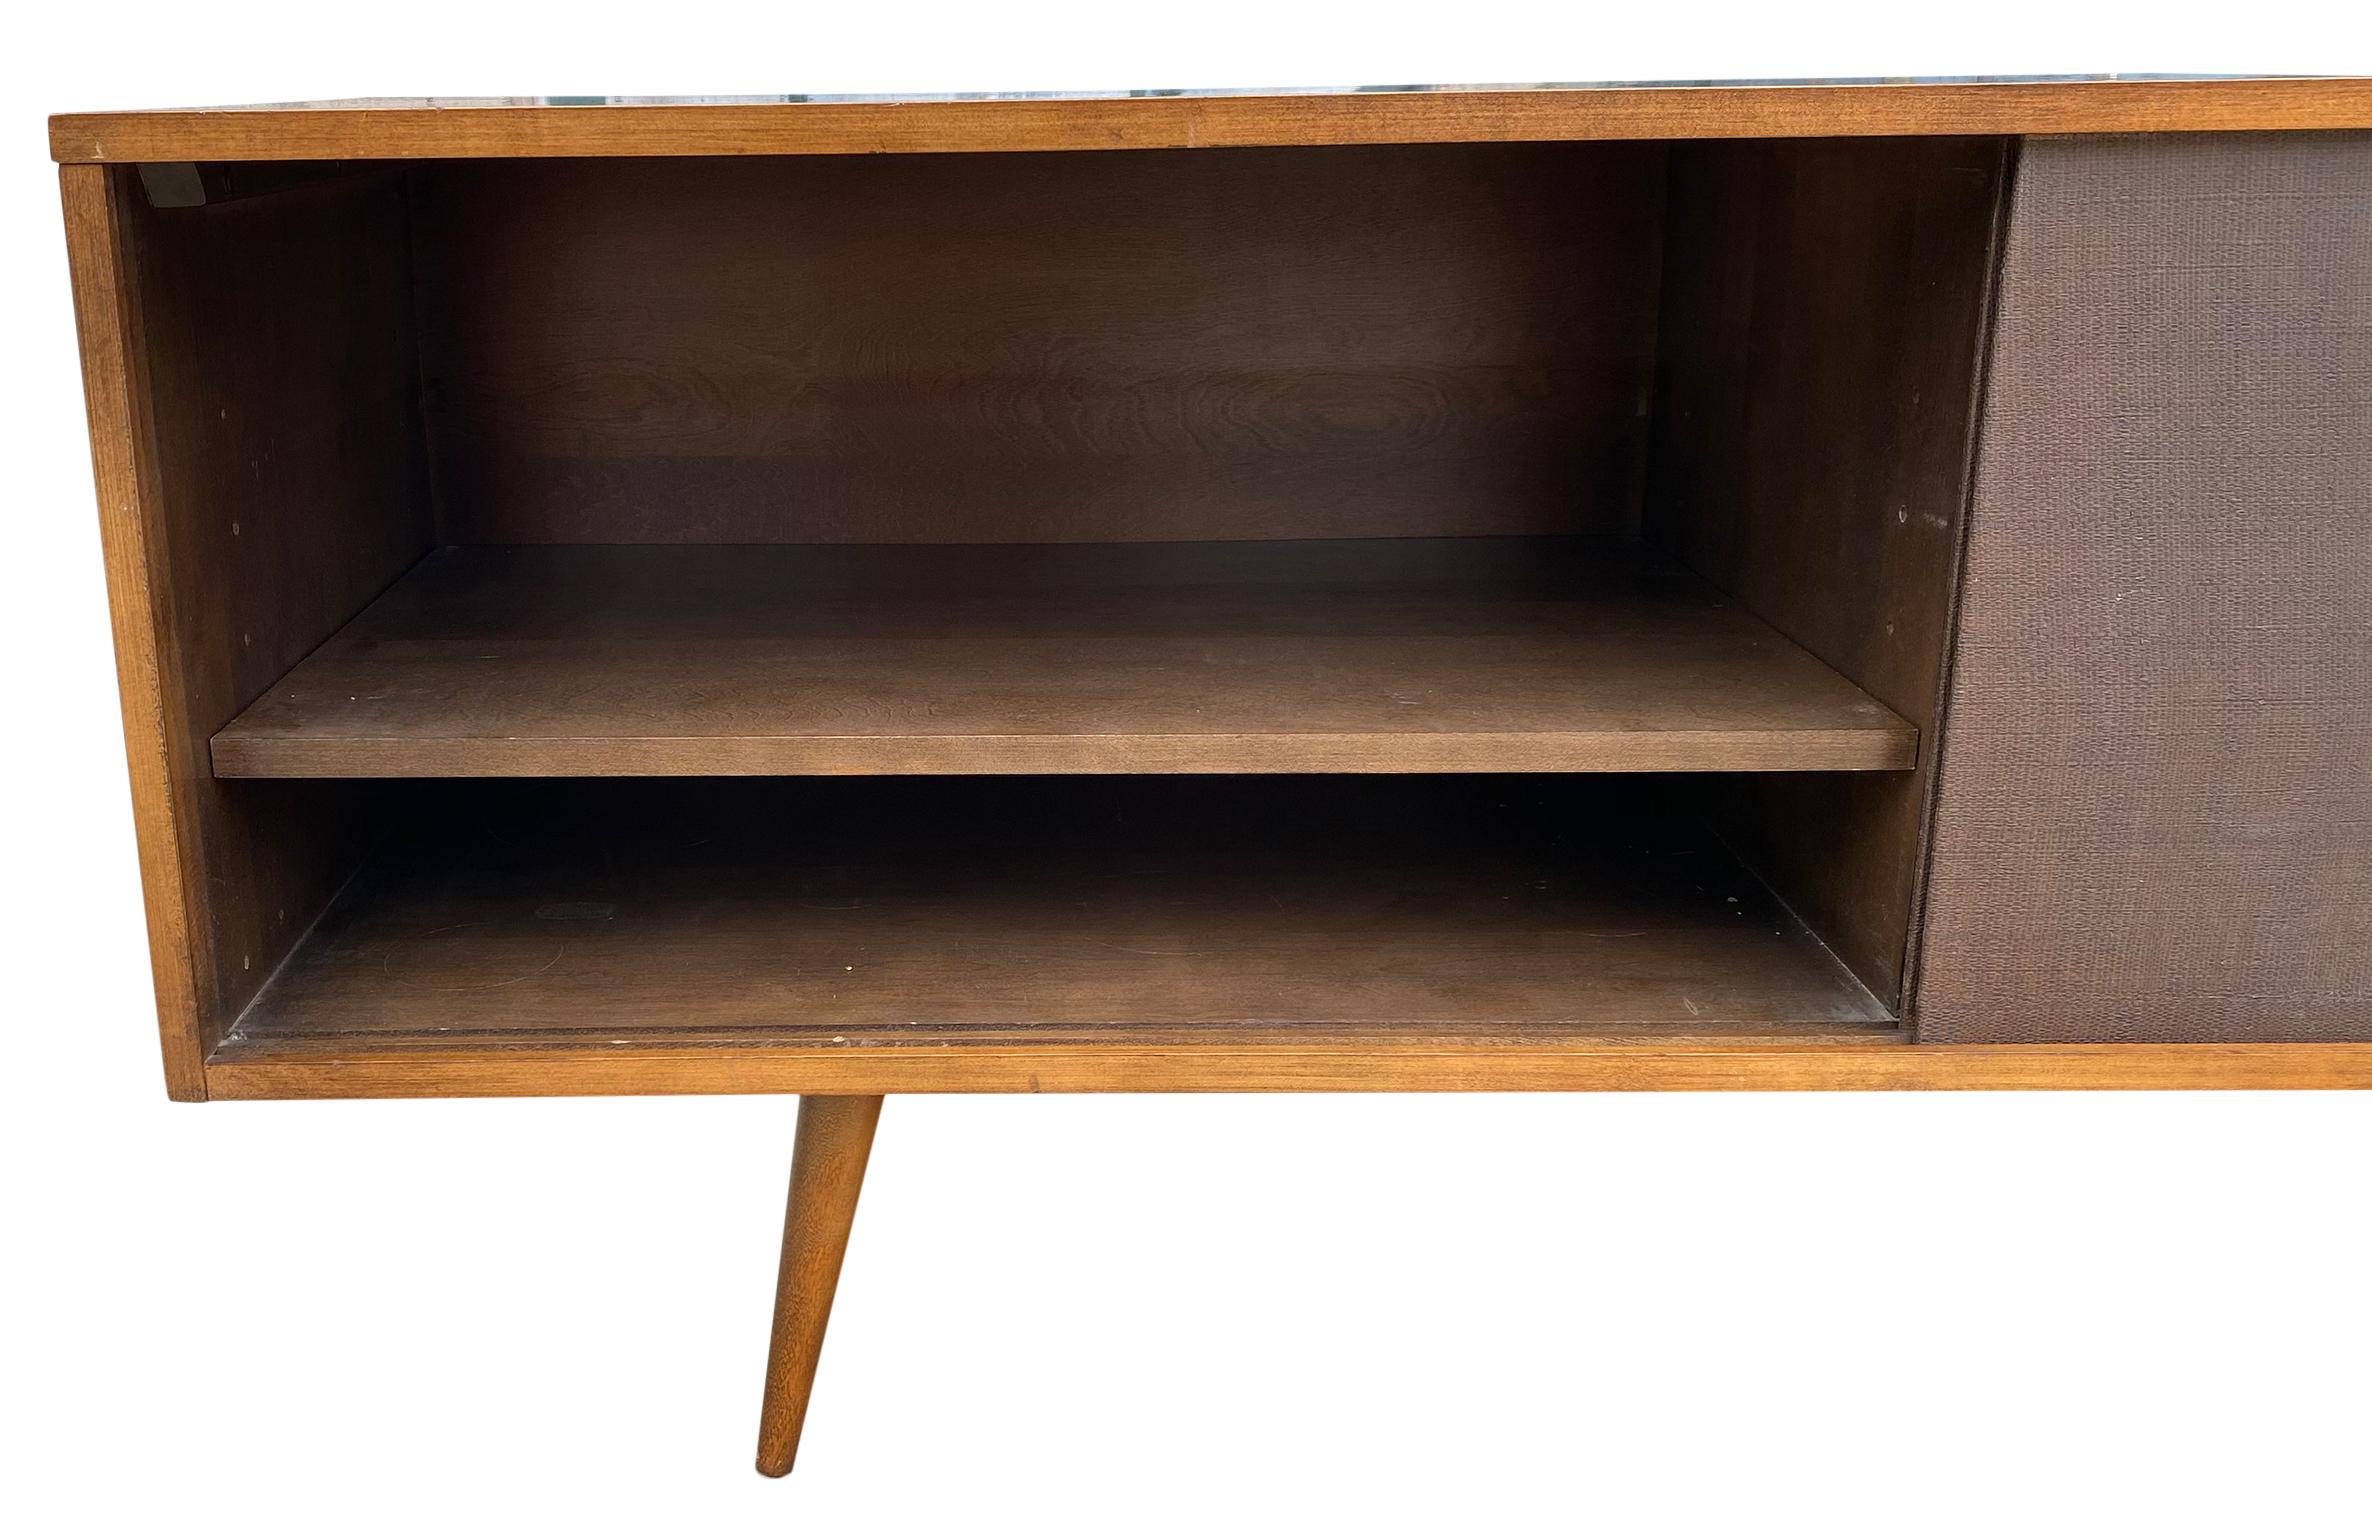 20th Century Midcentury Credenza by Paul McCobb Planner Group #1513 Brown Doors Tapered Legs